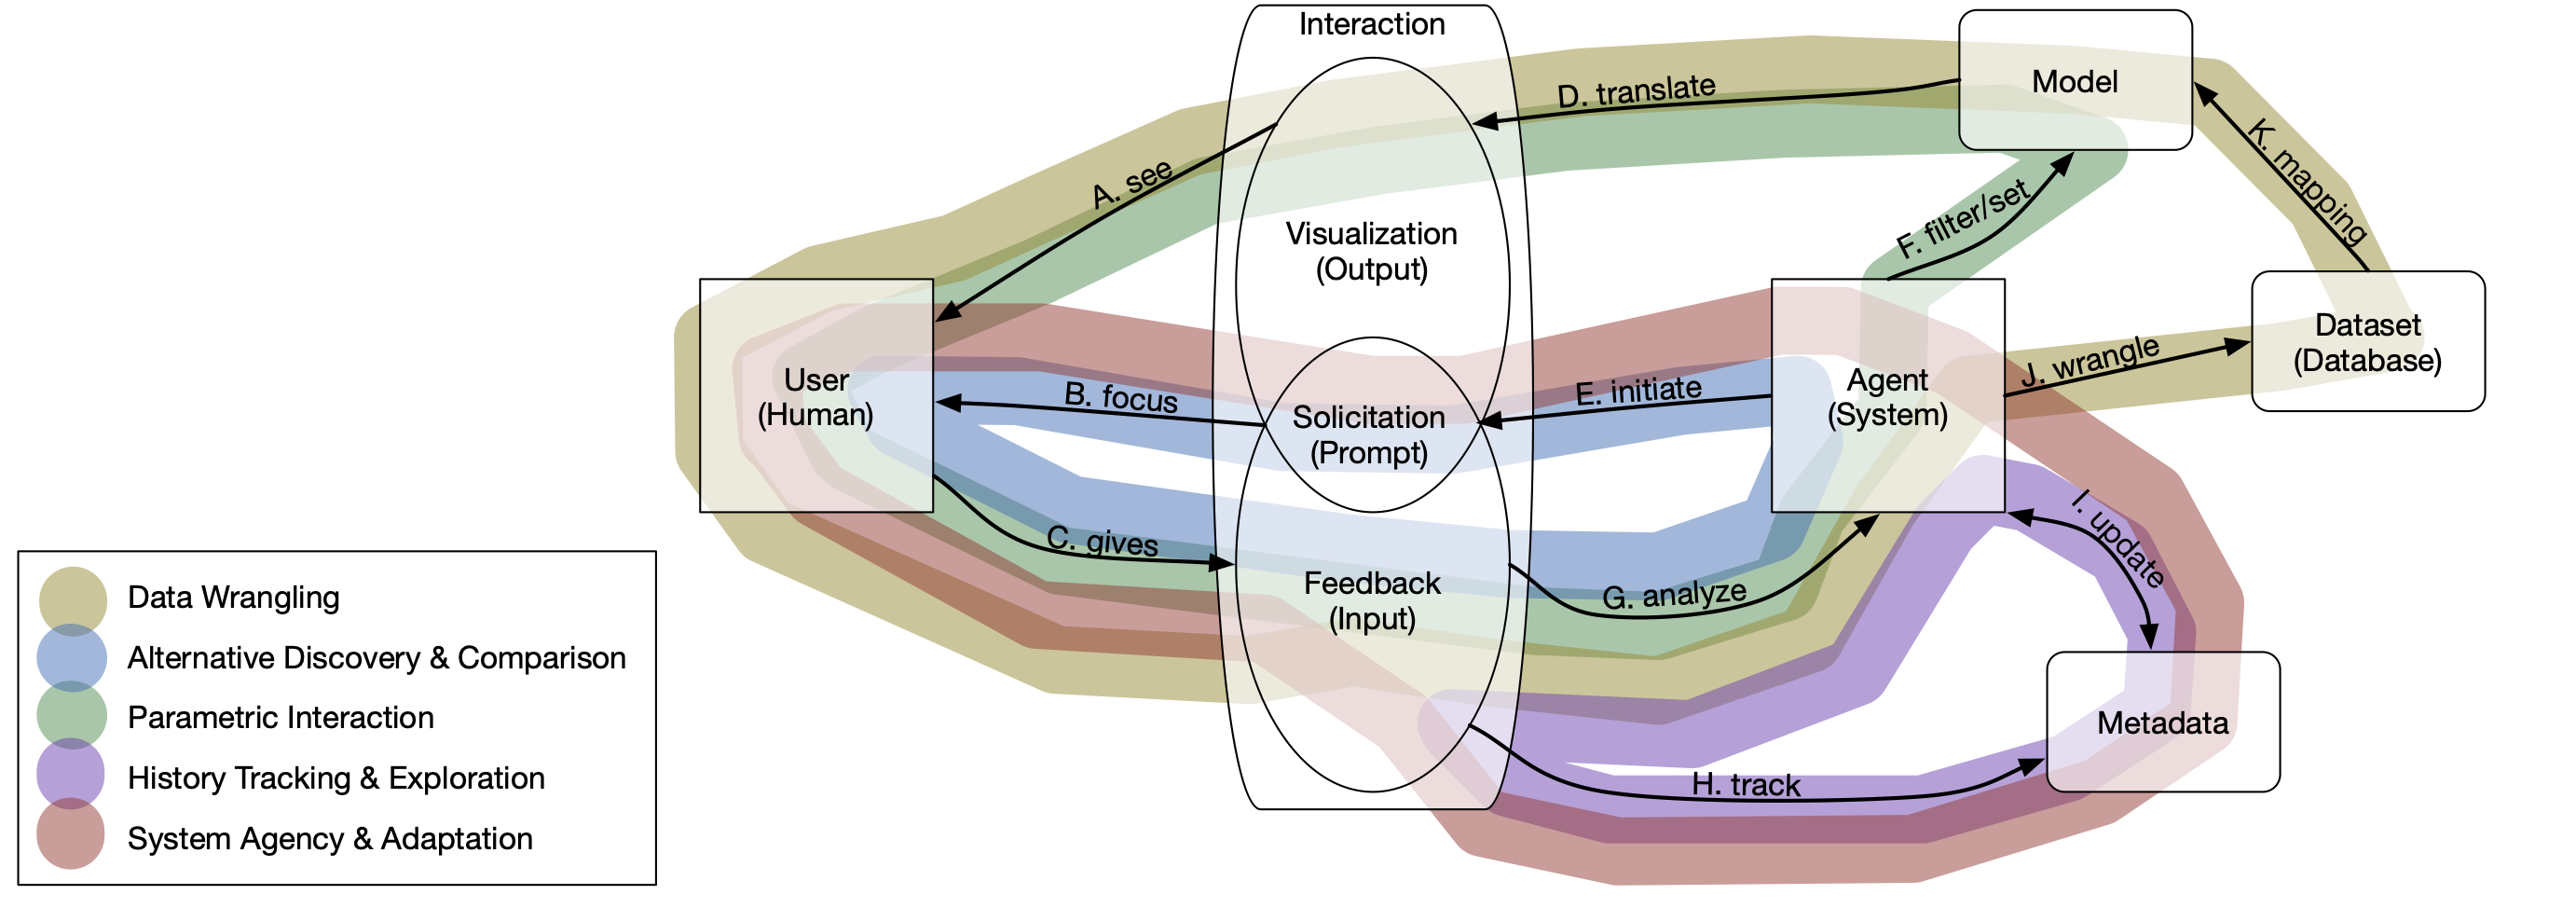 Mixed-Initiative for Big Data: The Intersection of Human + Visual Analytics + Prediction